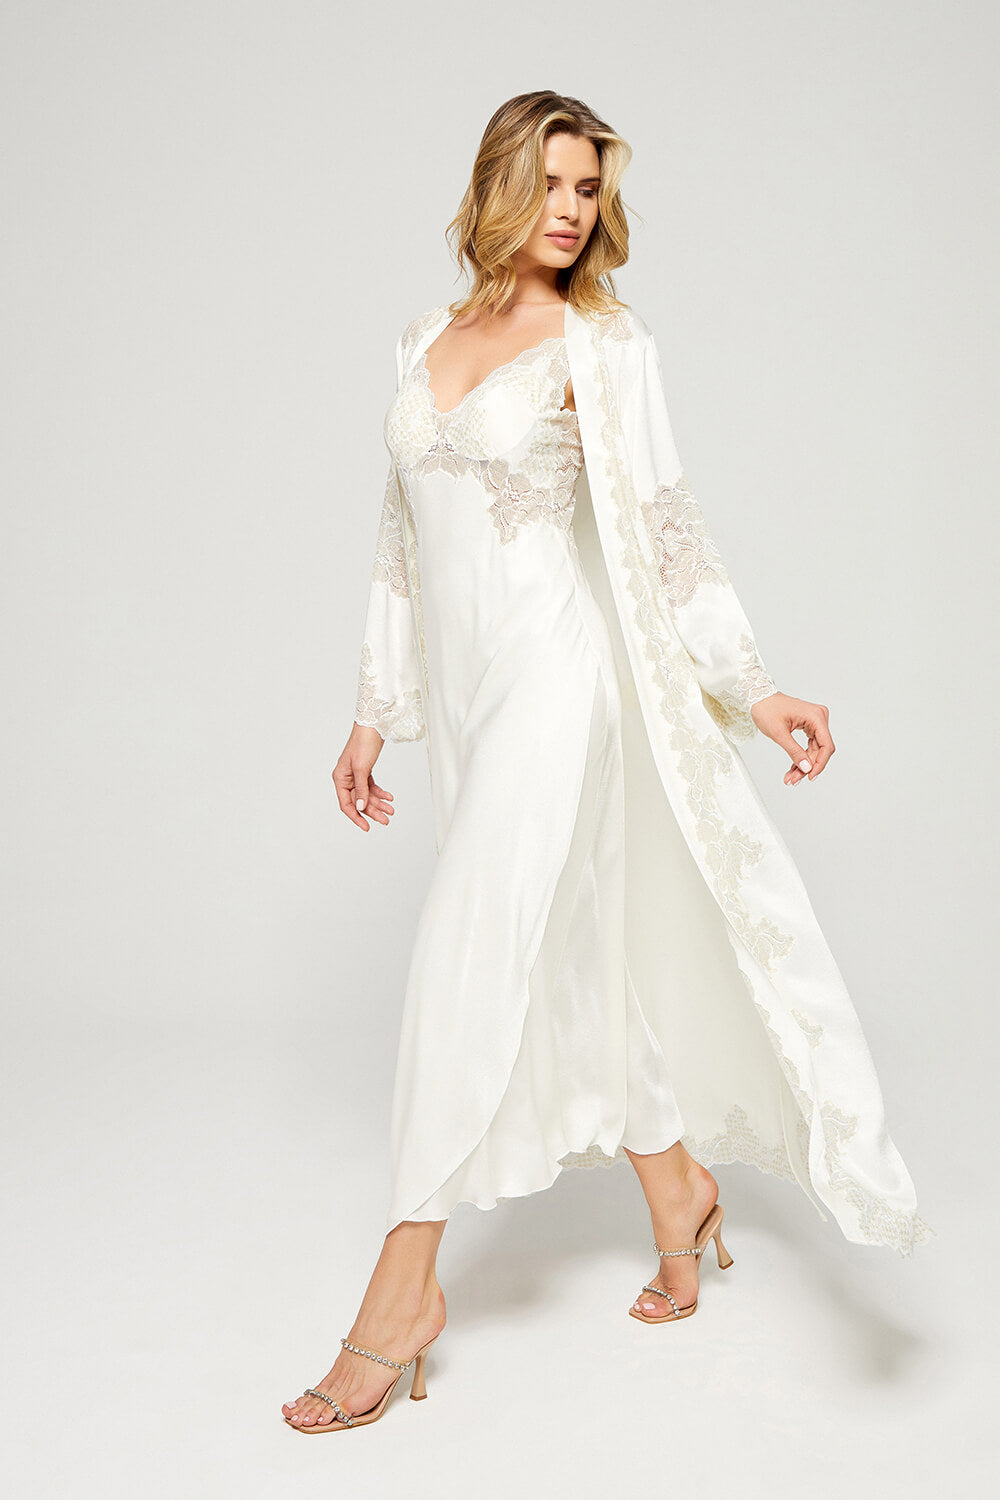 Yvonne - Long Rayon Trimmed with Lace Robe Set - Off White